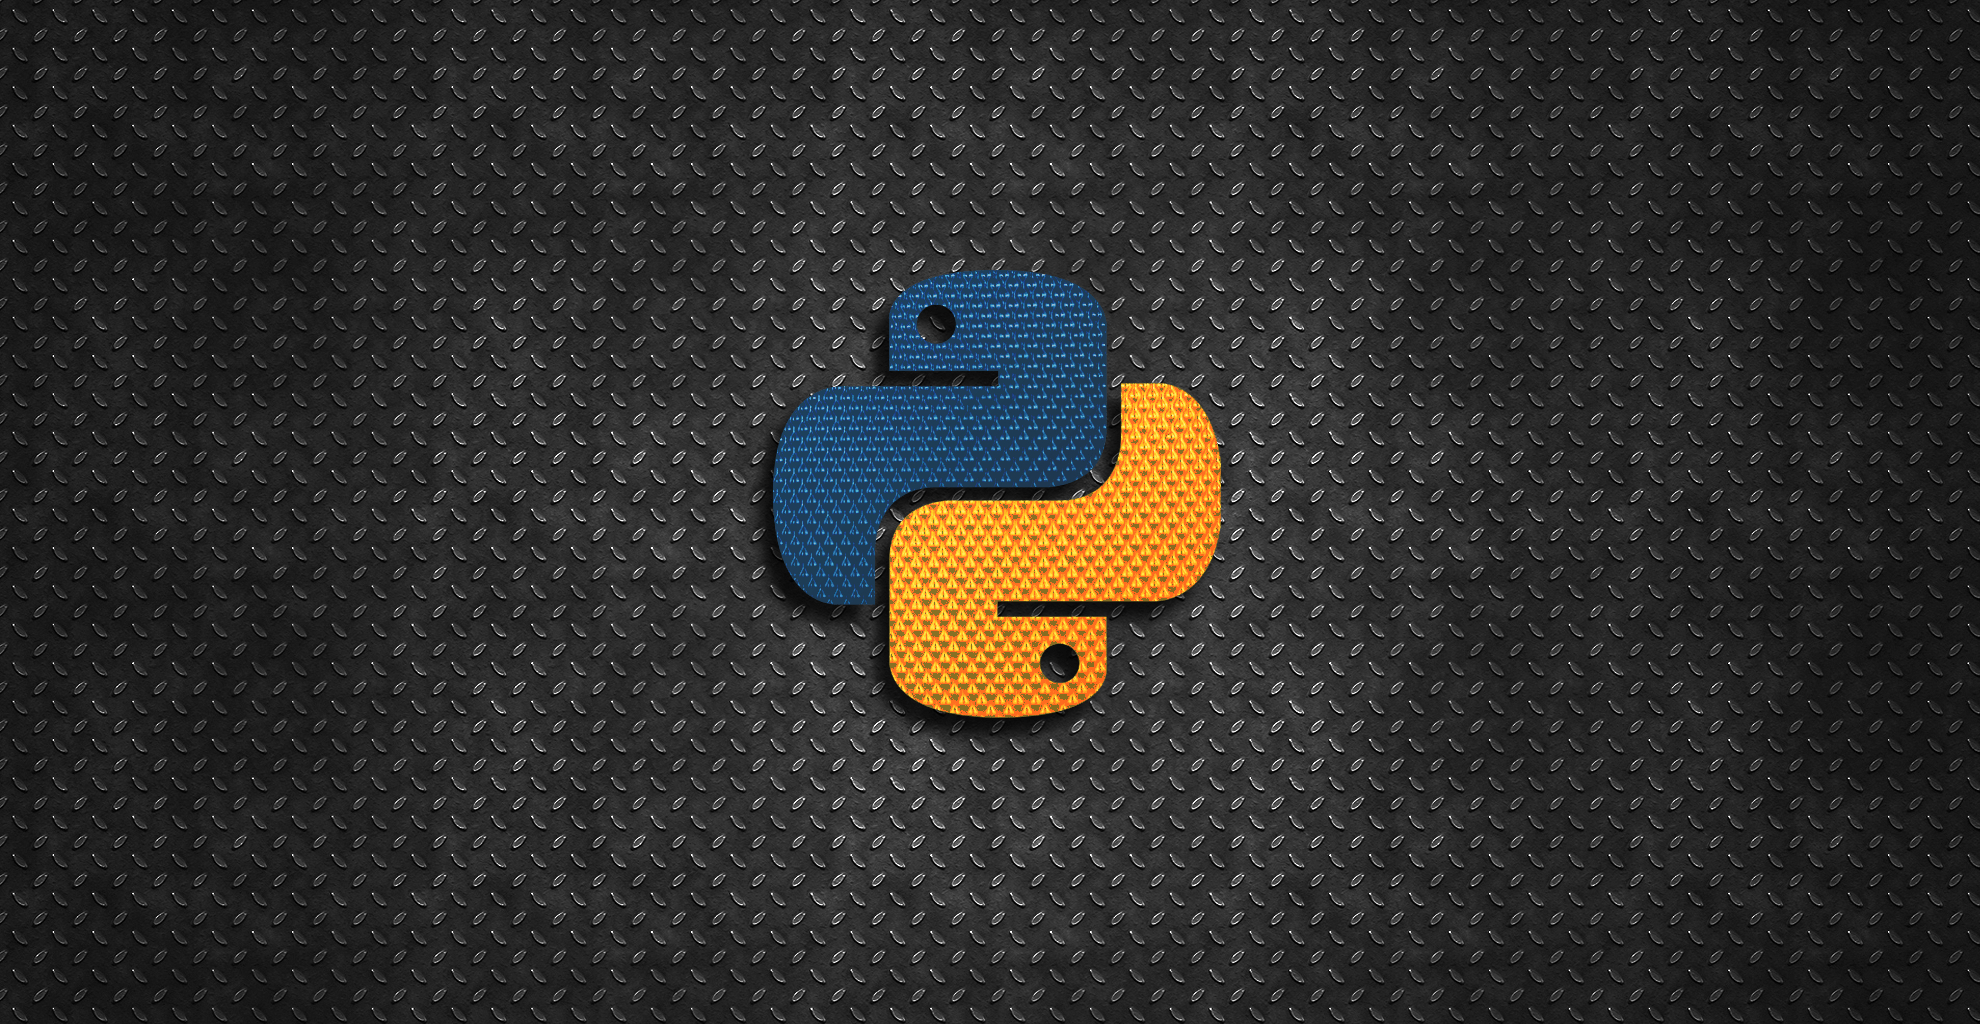 Python Wallpapers Top Free Python Backgrounds Wallpaperaccess